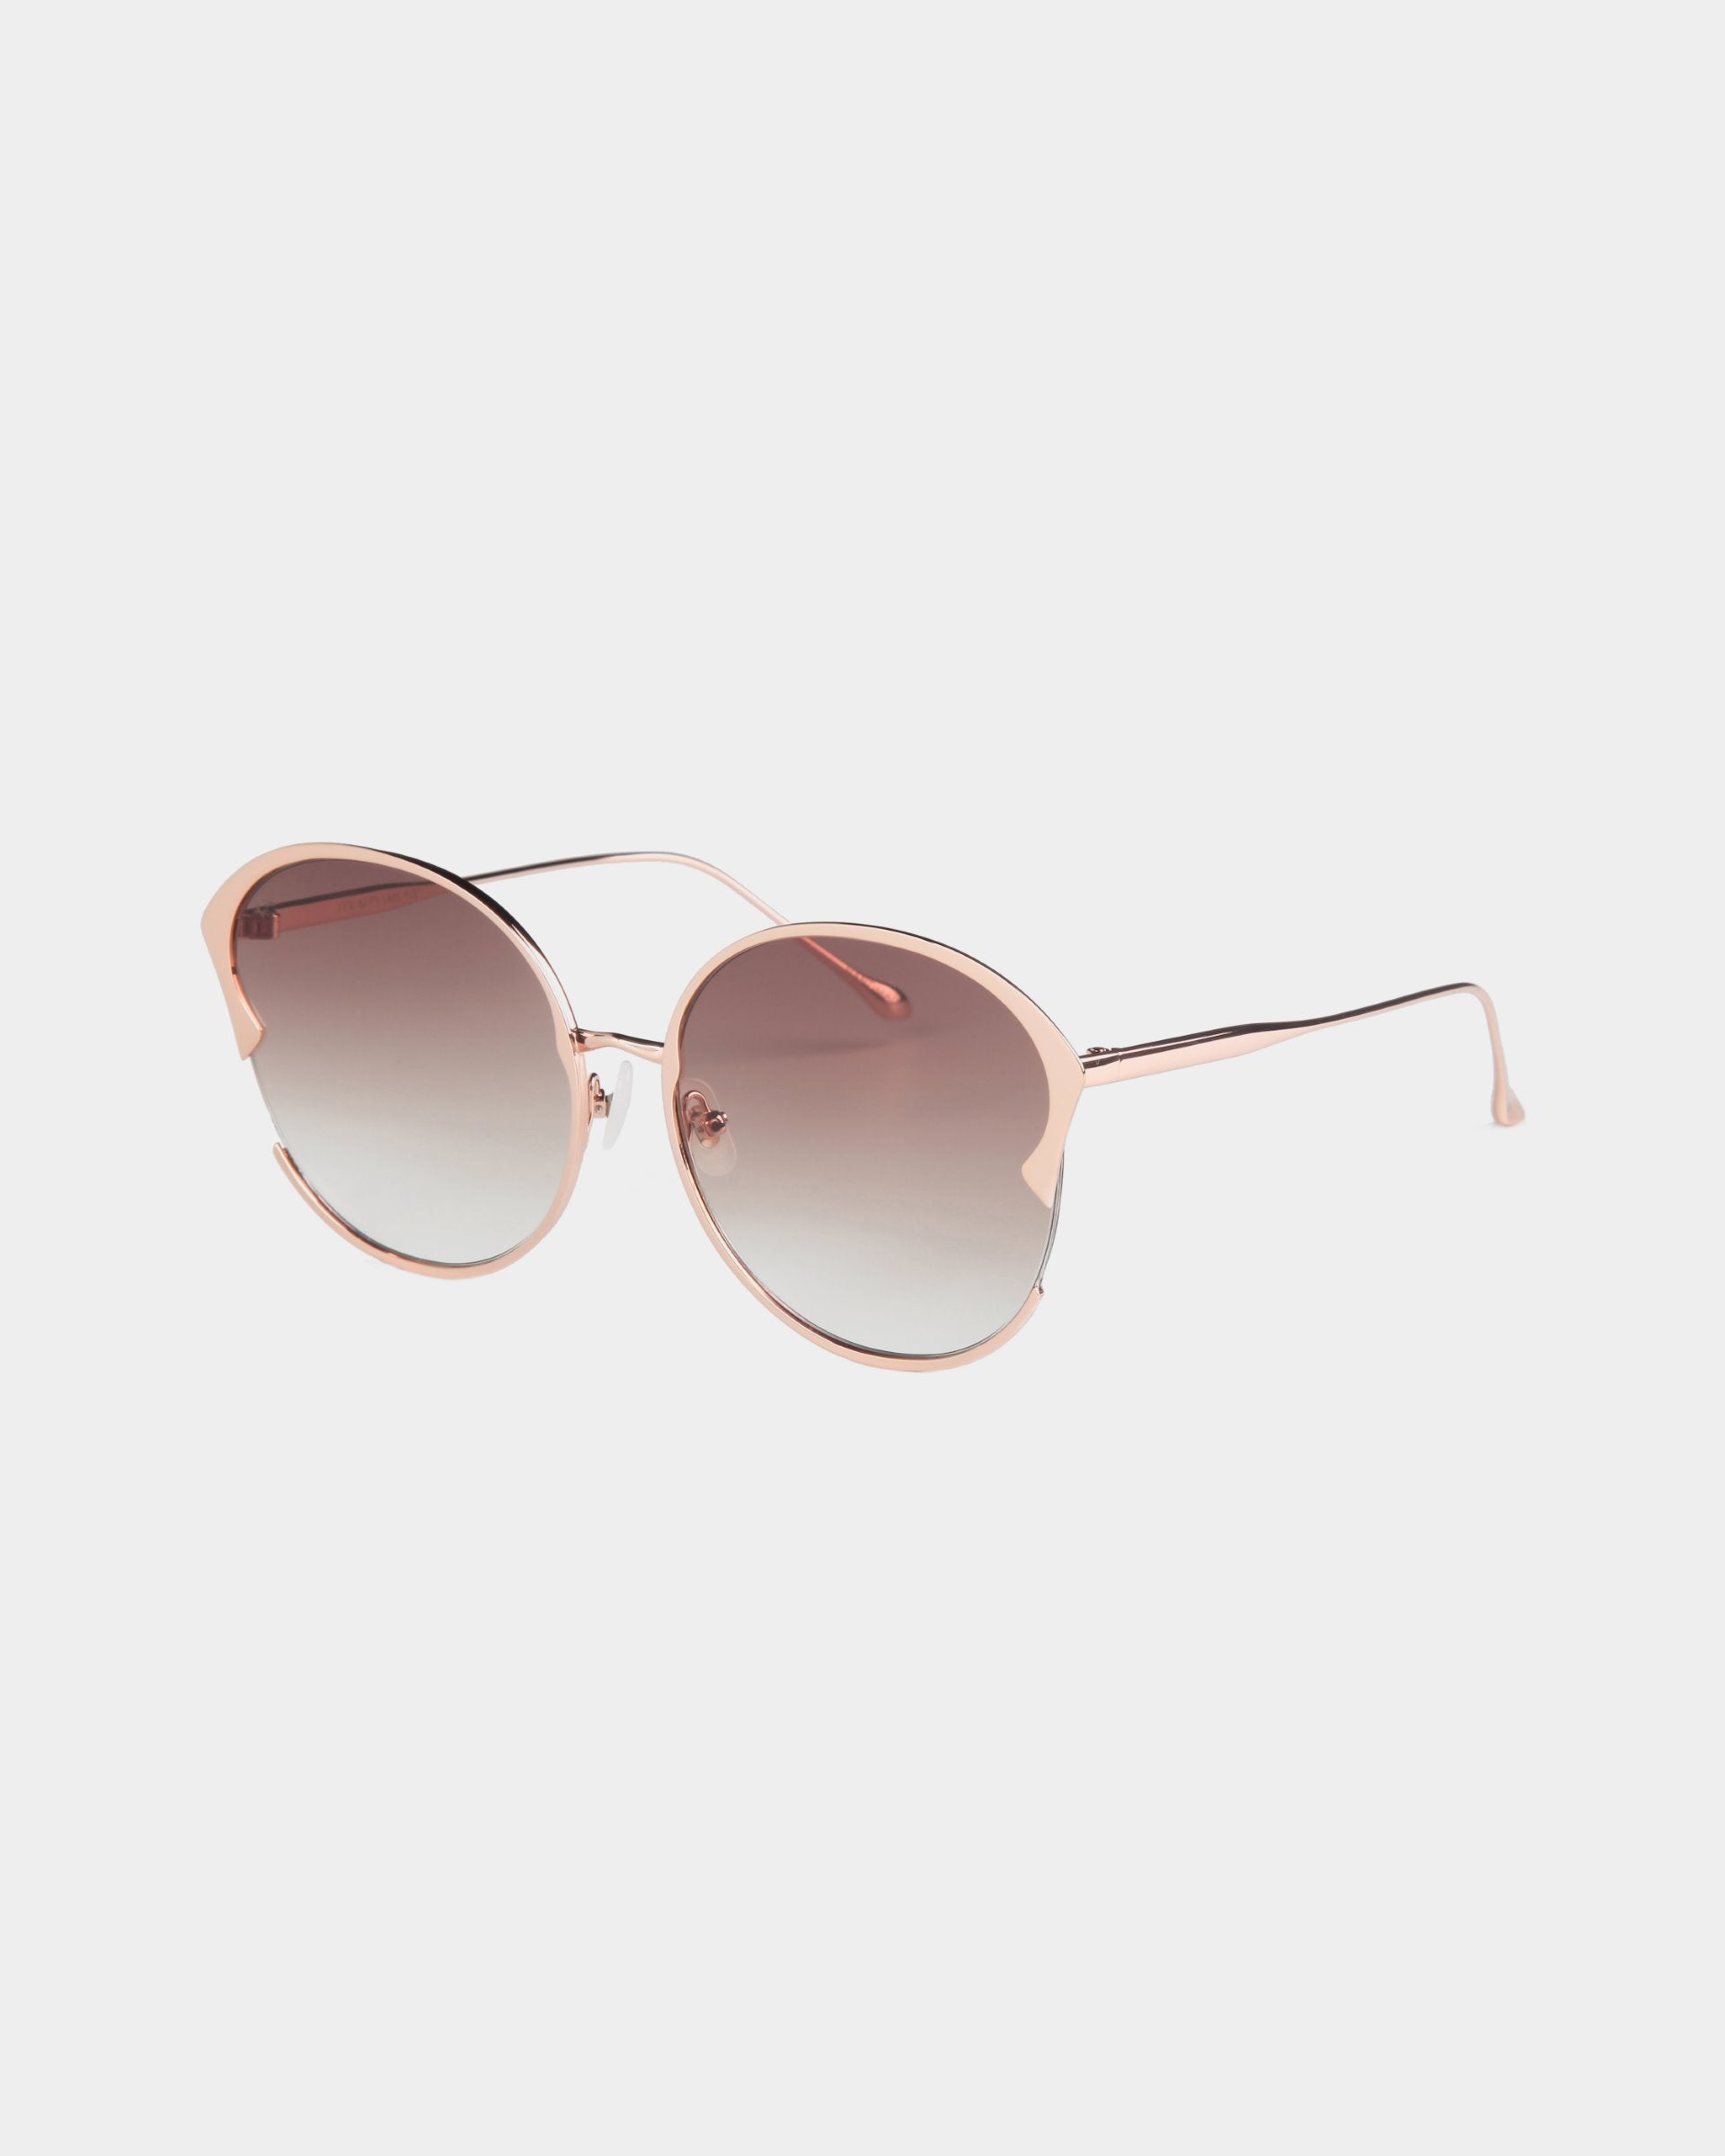 A pair of stylish **For Art&#39;s Sake® Alectrona** sunglasses with an 18-karat gold-plated light pink metallic frame and gradient, shatter-resistant lenses. The lenses are darker at the top and gradually lighten towards the bottom. The design is modern with a slight cat-eye shape, thin curved temples, and adjustable jade nose pads.